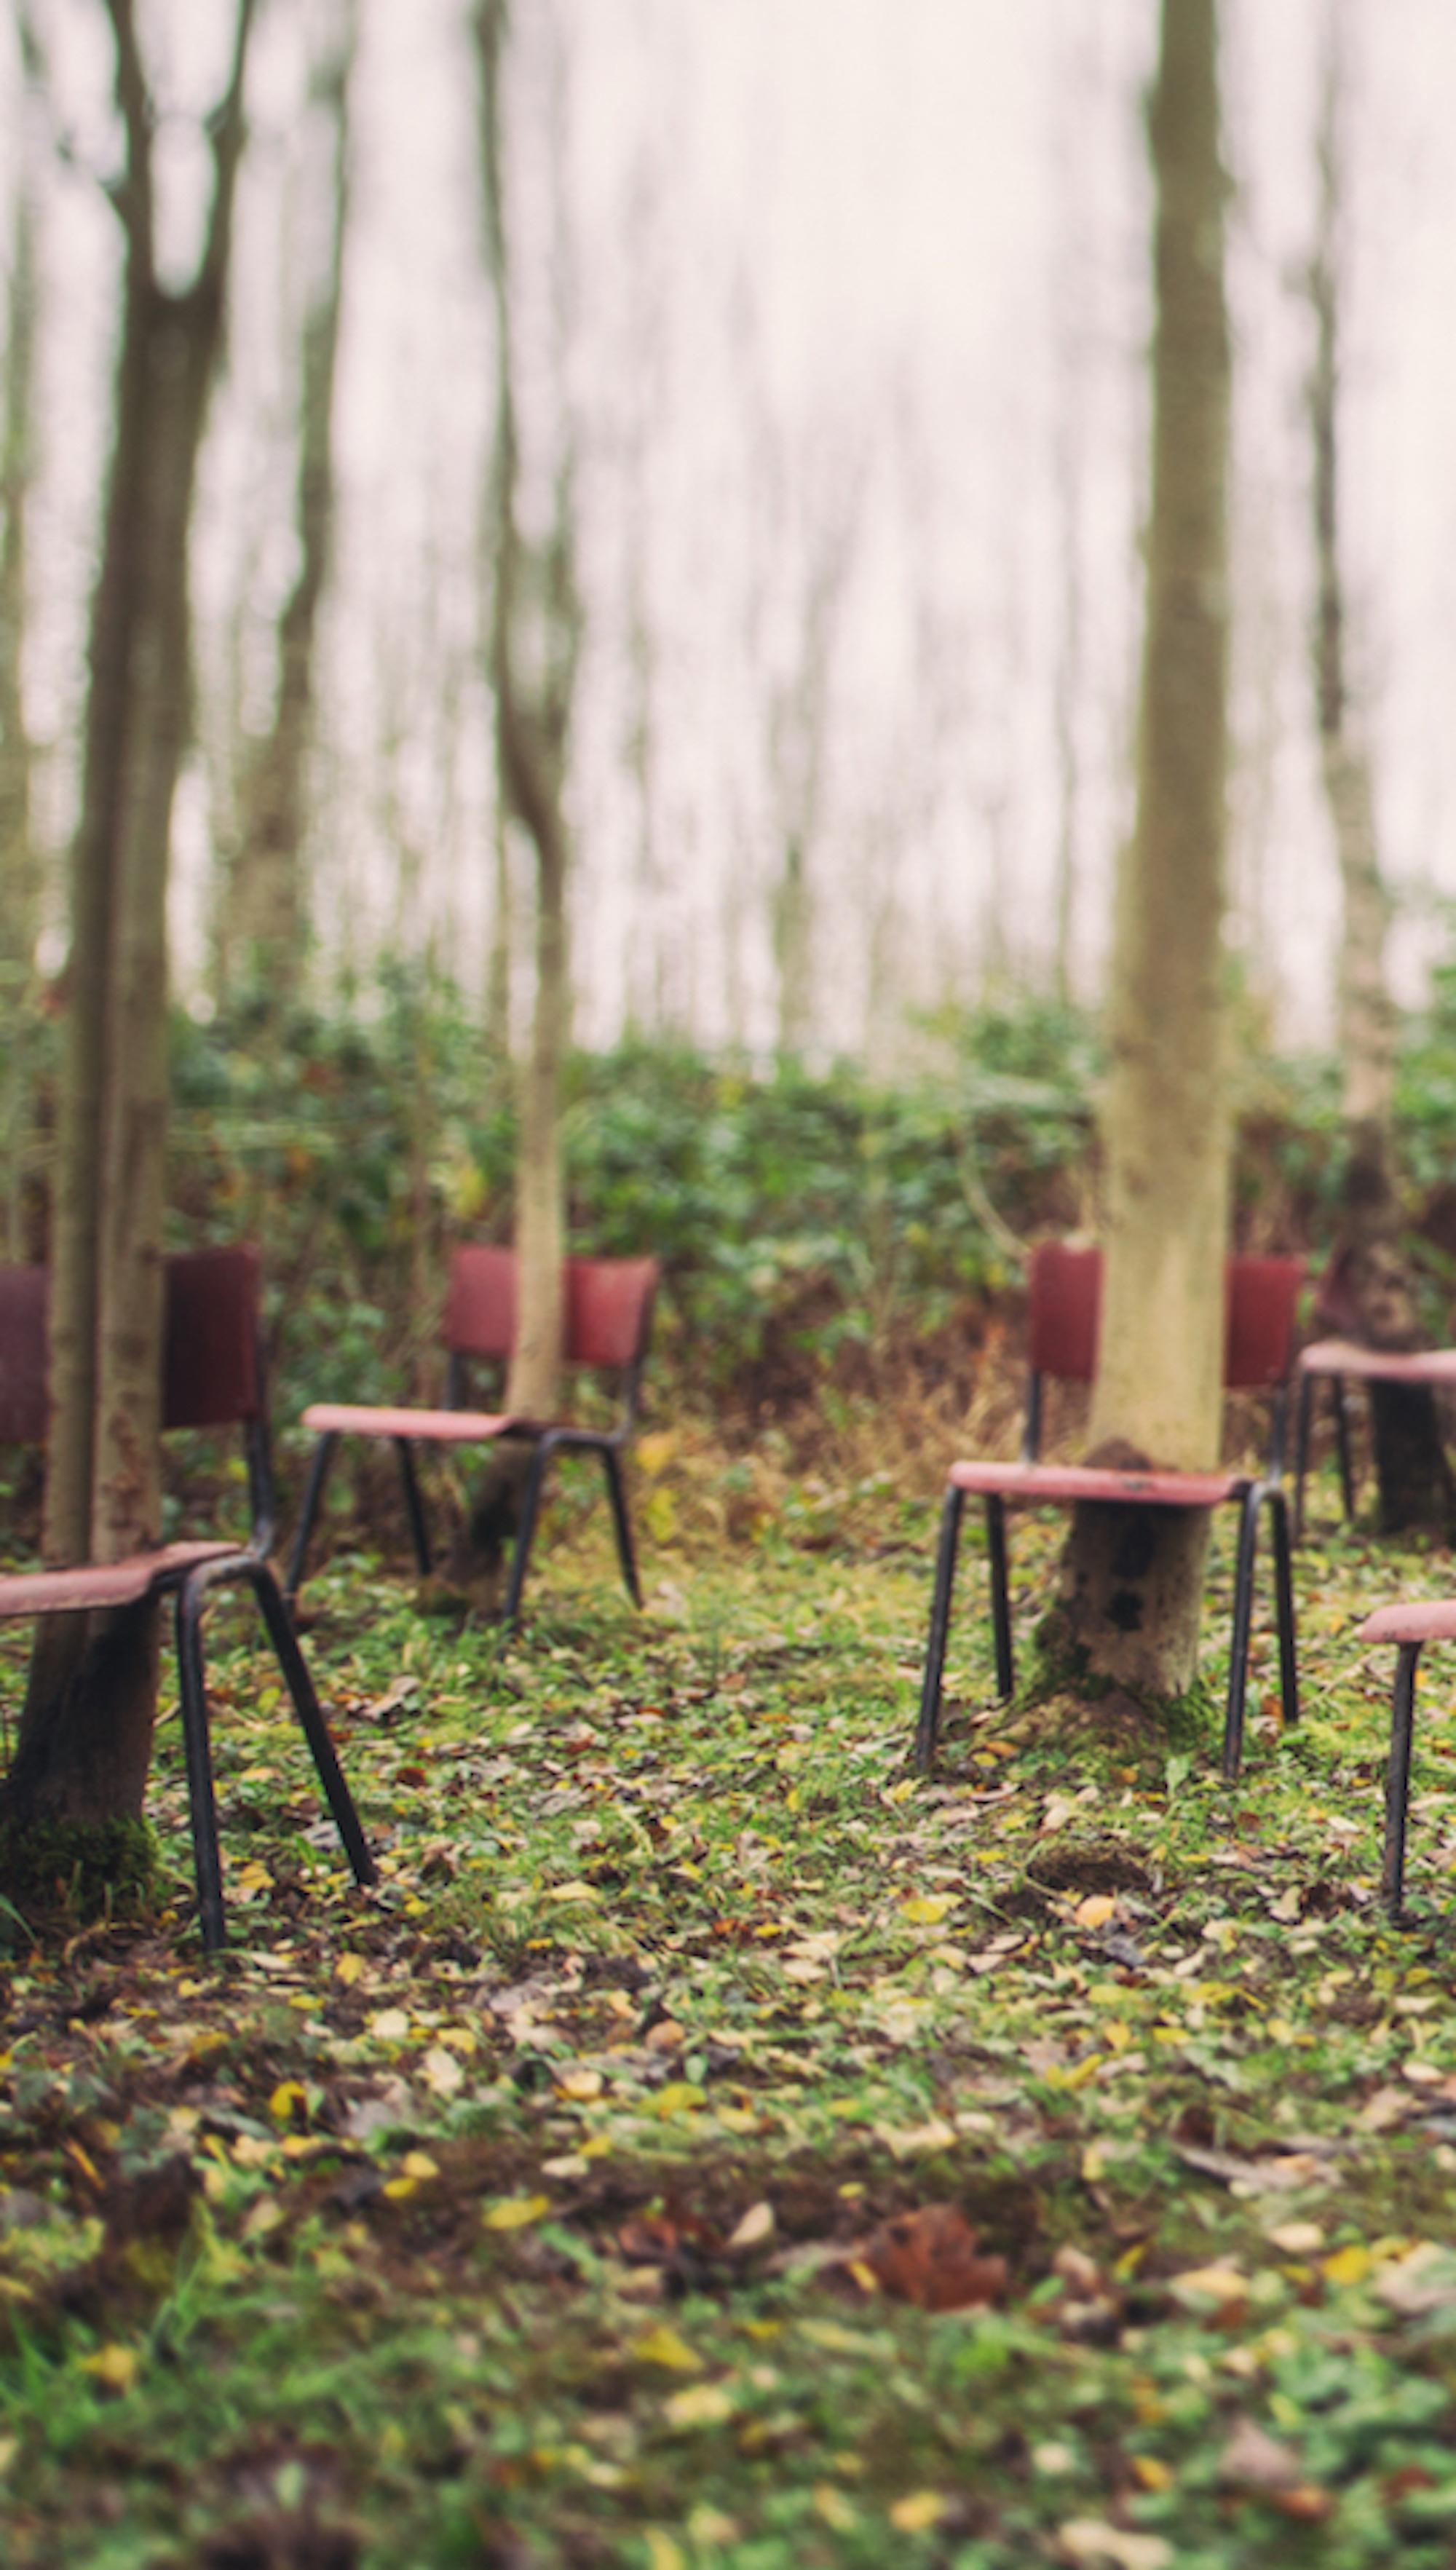 Orchestral by Gina Soden - Abandoned place, urbex photography, forest, chairs For Sale 2